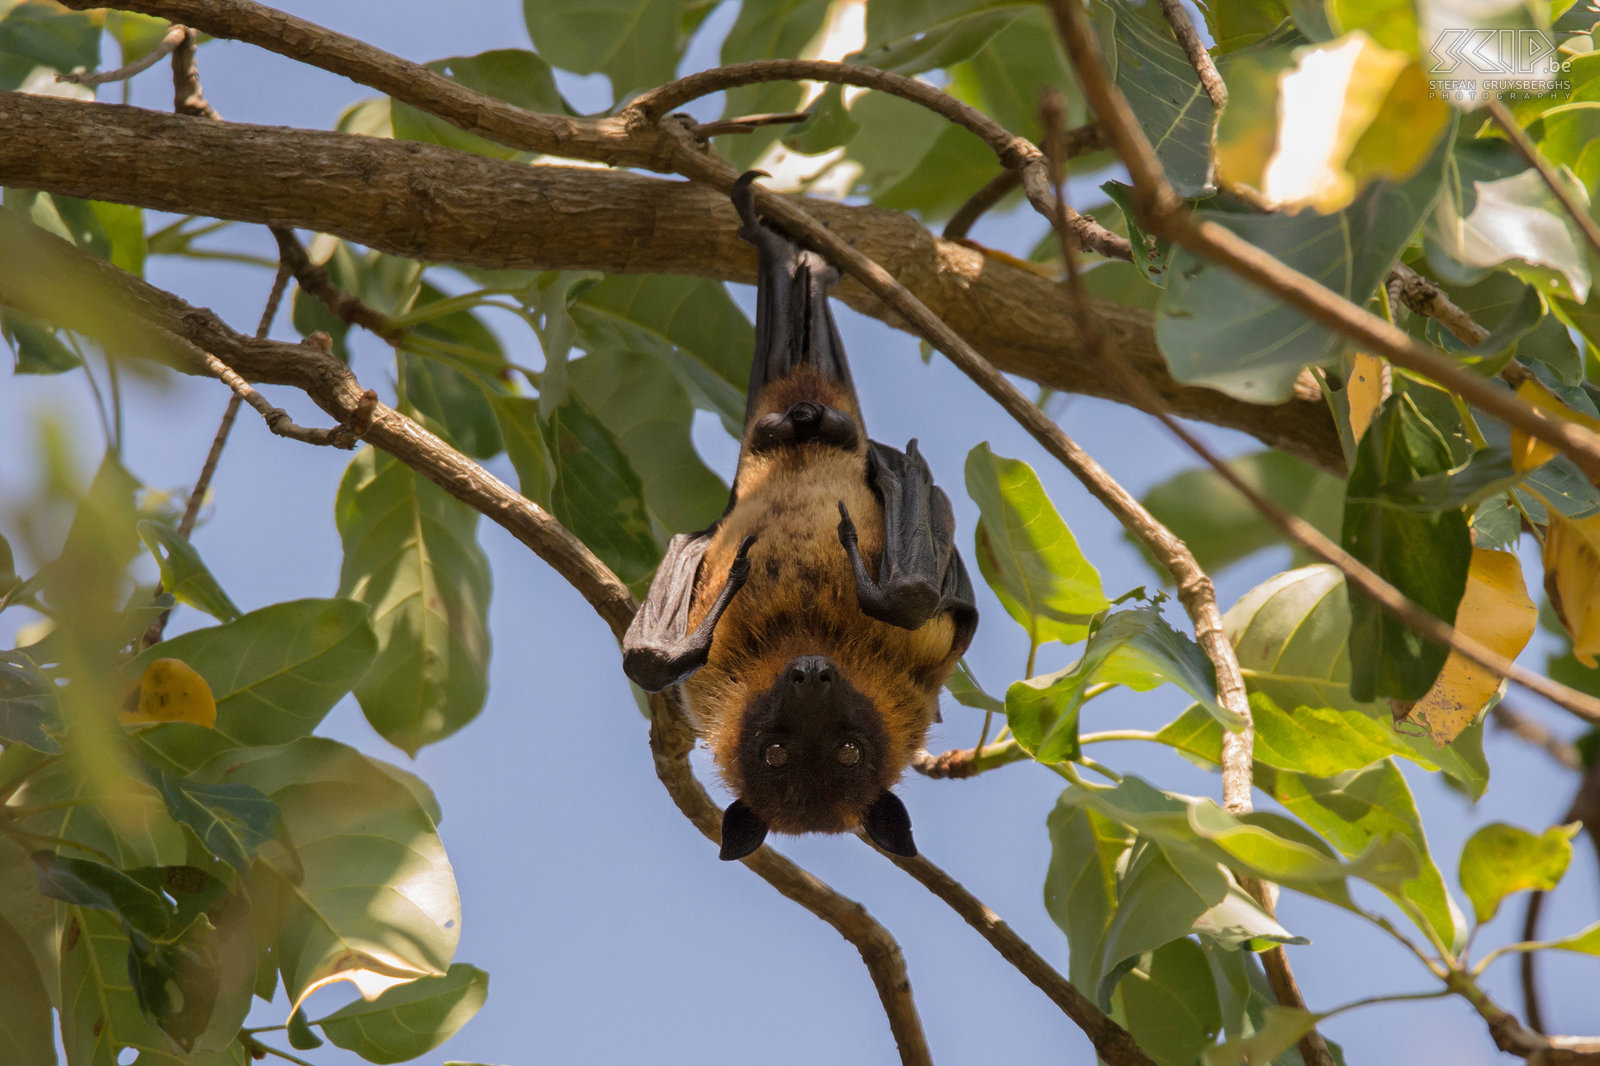 Kabini - Indian flying fox The Indian flying fox (Pteropus giganteus) is nocturnal and feeds mainly on fruits and nectar from flowers. During the day they all hang down on the branches of some trees. Stefan Cruysberghs